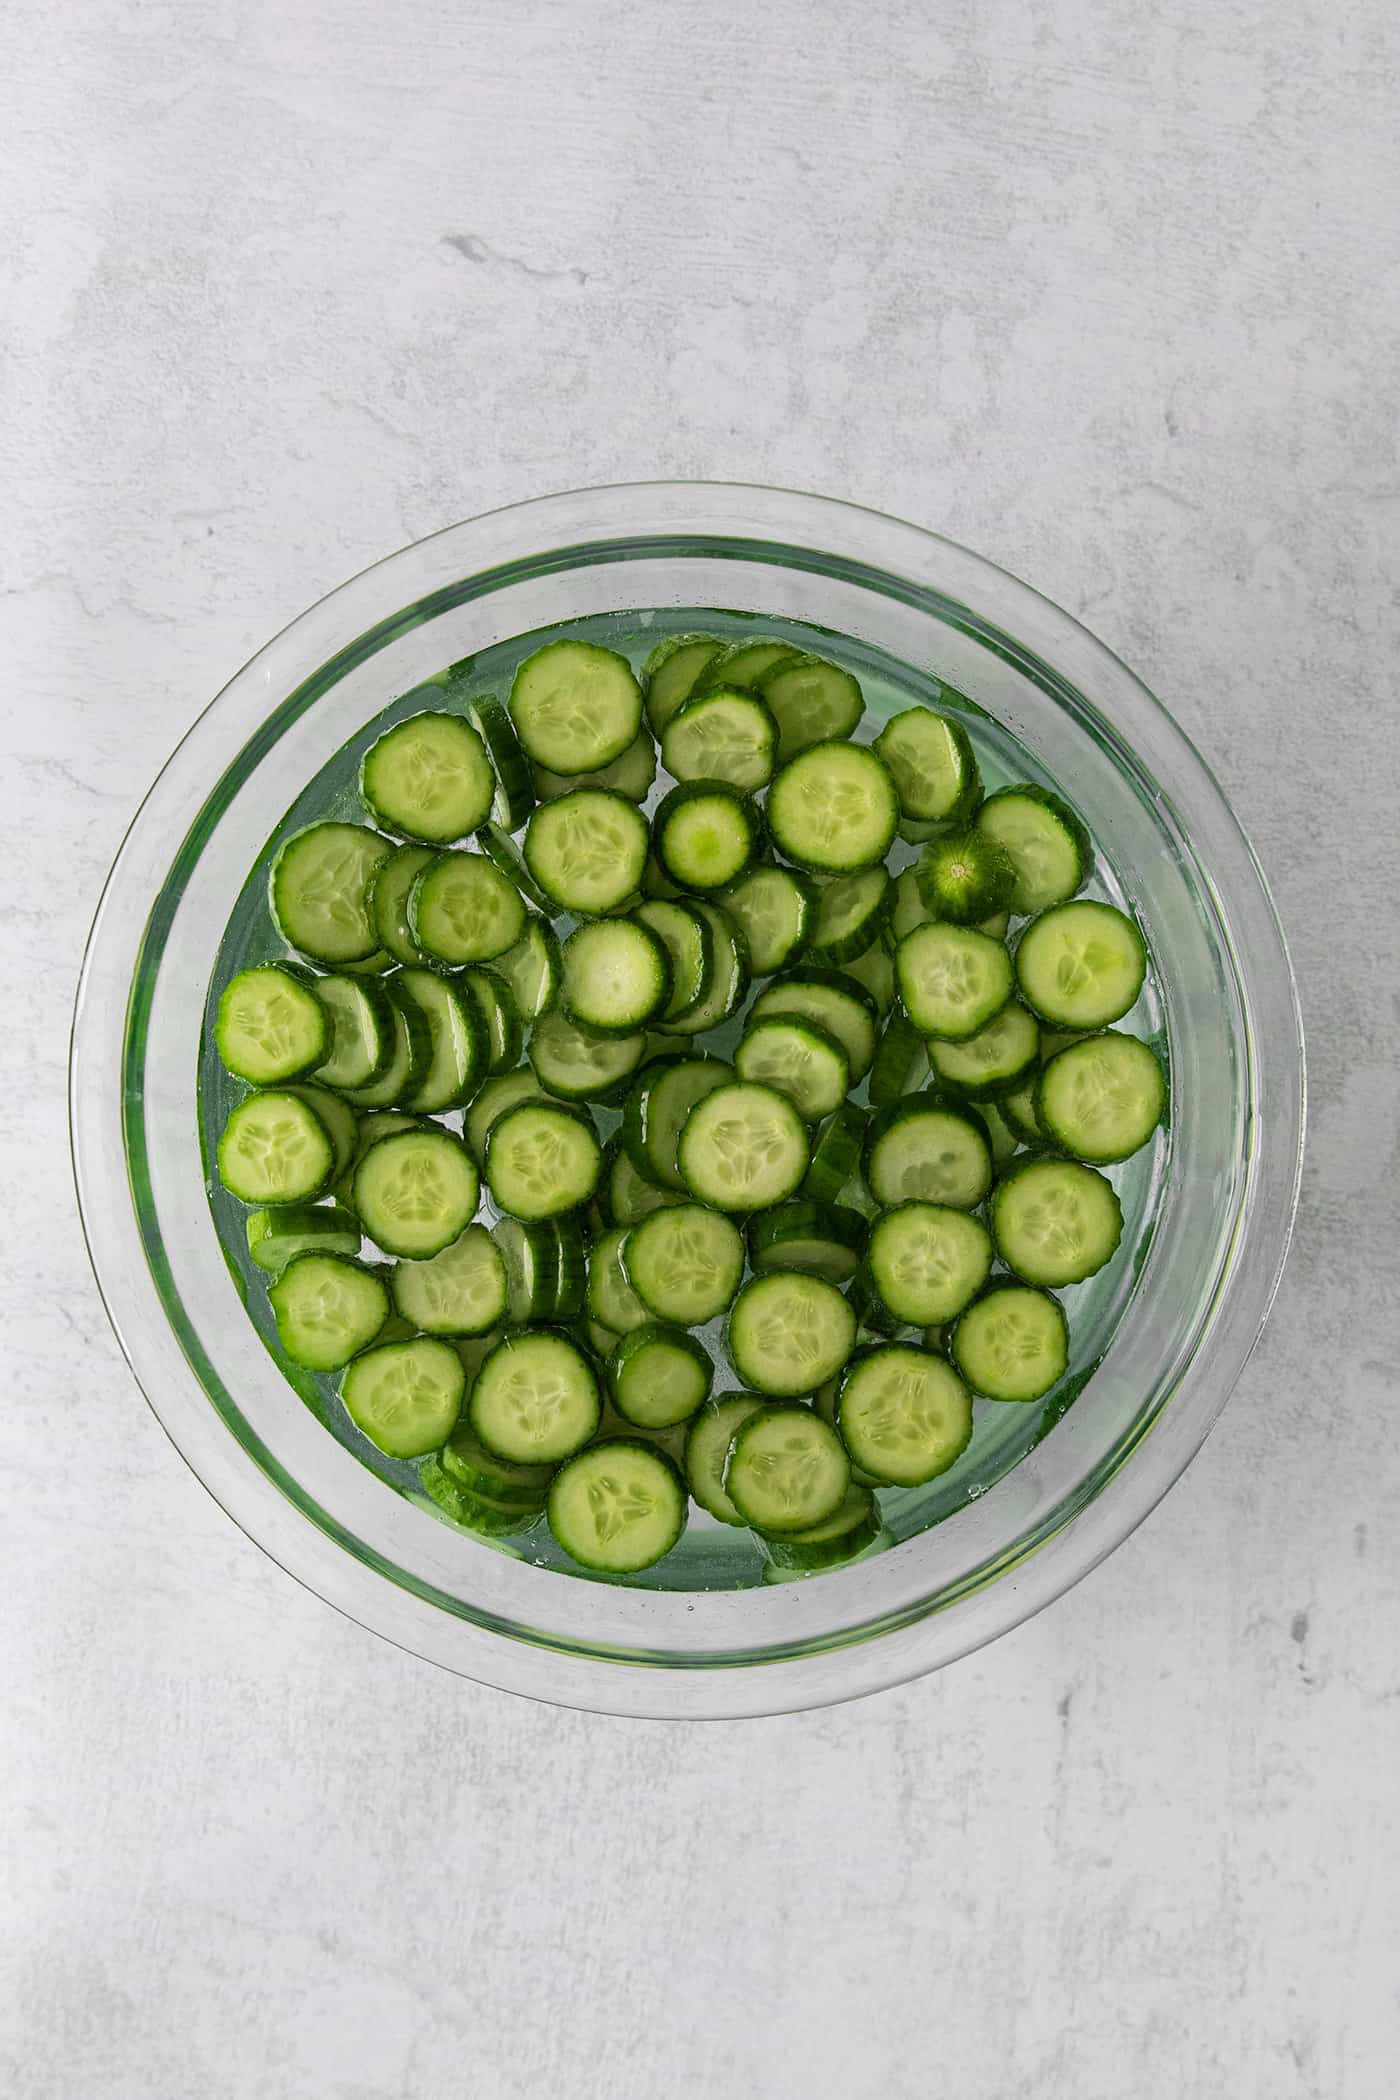 Slices of cucumber soaking in water